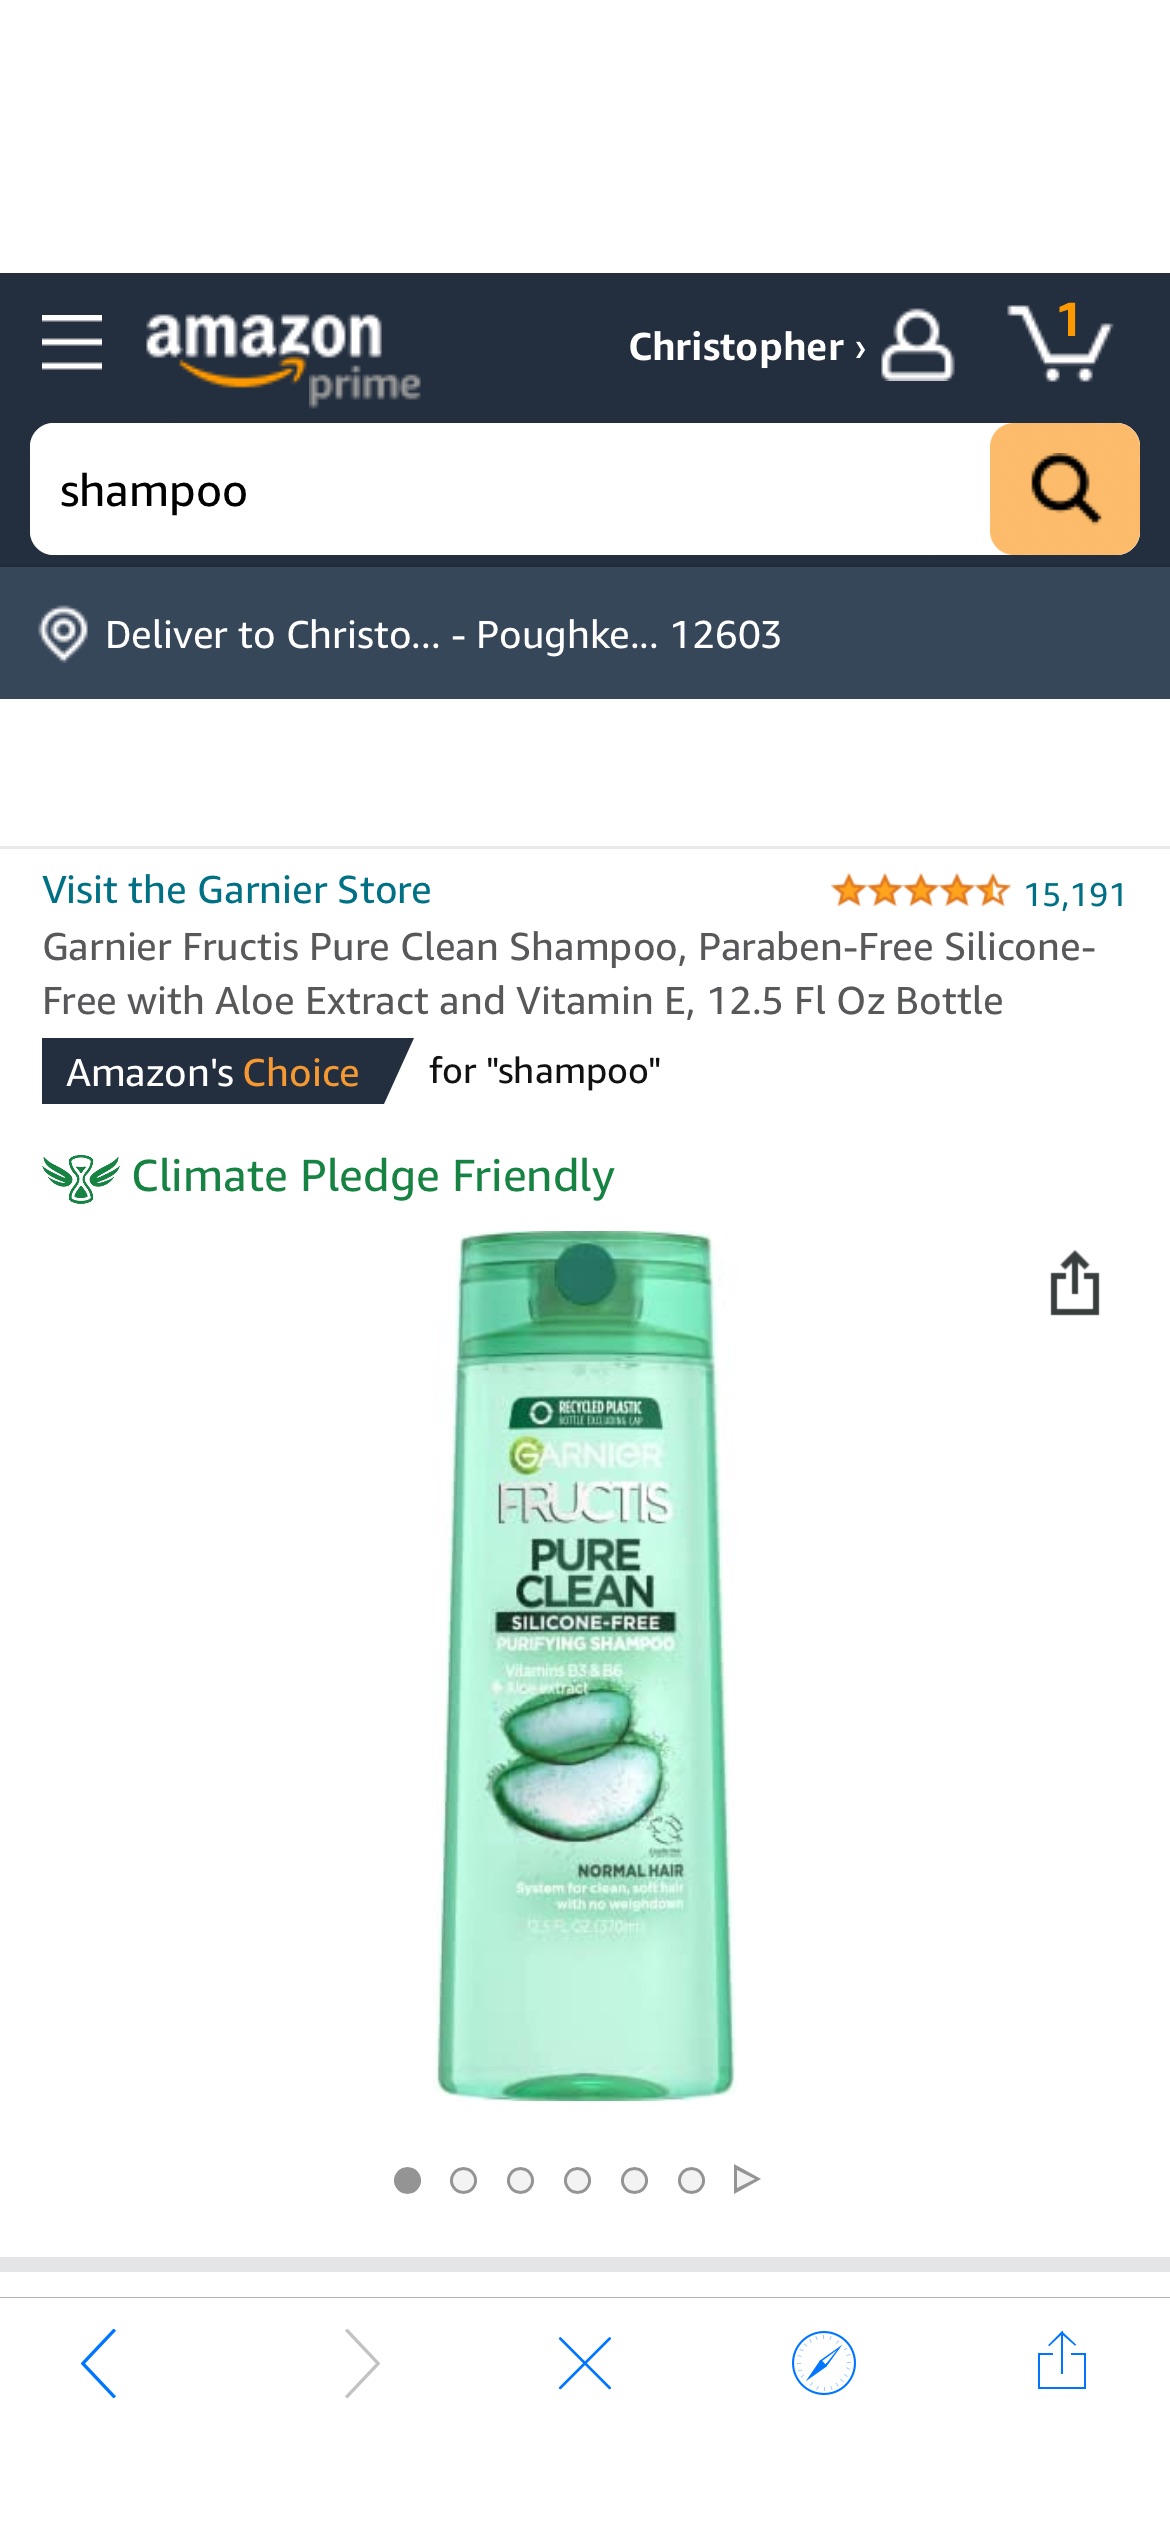 Amazon.com: Garnier Fructis Pure Clean Shampoo, Paraben-Free Silicone-Free with Aloe Extract and Vitamin E, 12.5 Fl Oz Bottle洗发水